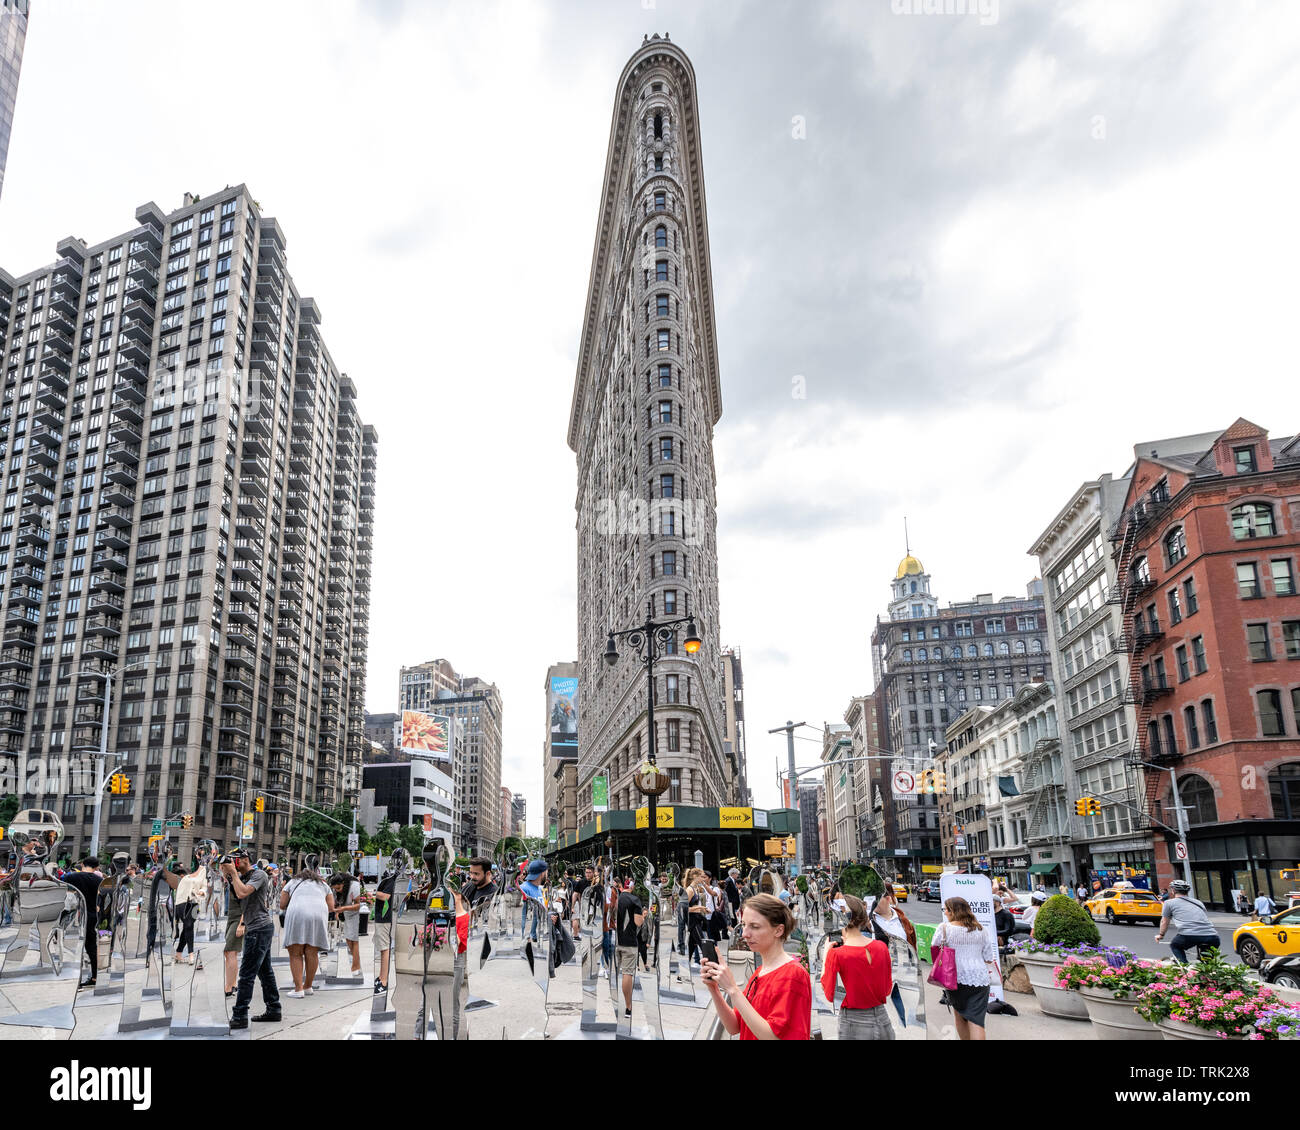 New York, USA,  7 June 2019. Visitors photograph a one-day art installation called 'The Shape of History' in New York City's Flatiron plaza. The installation organized by CNN and Hulu to promote their series 'The Handmaid's Tale' consists of 140 mirrored statues - the amount needed for equal gender representation in New York City, where only 5 out of the city's 145 statues represent women. Credit: Enrique Shore/Alamy Live News Stock Photo